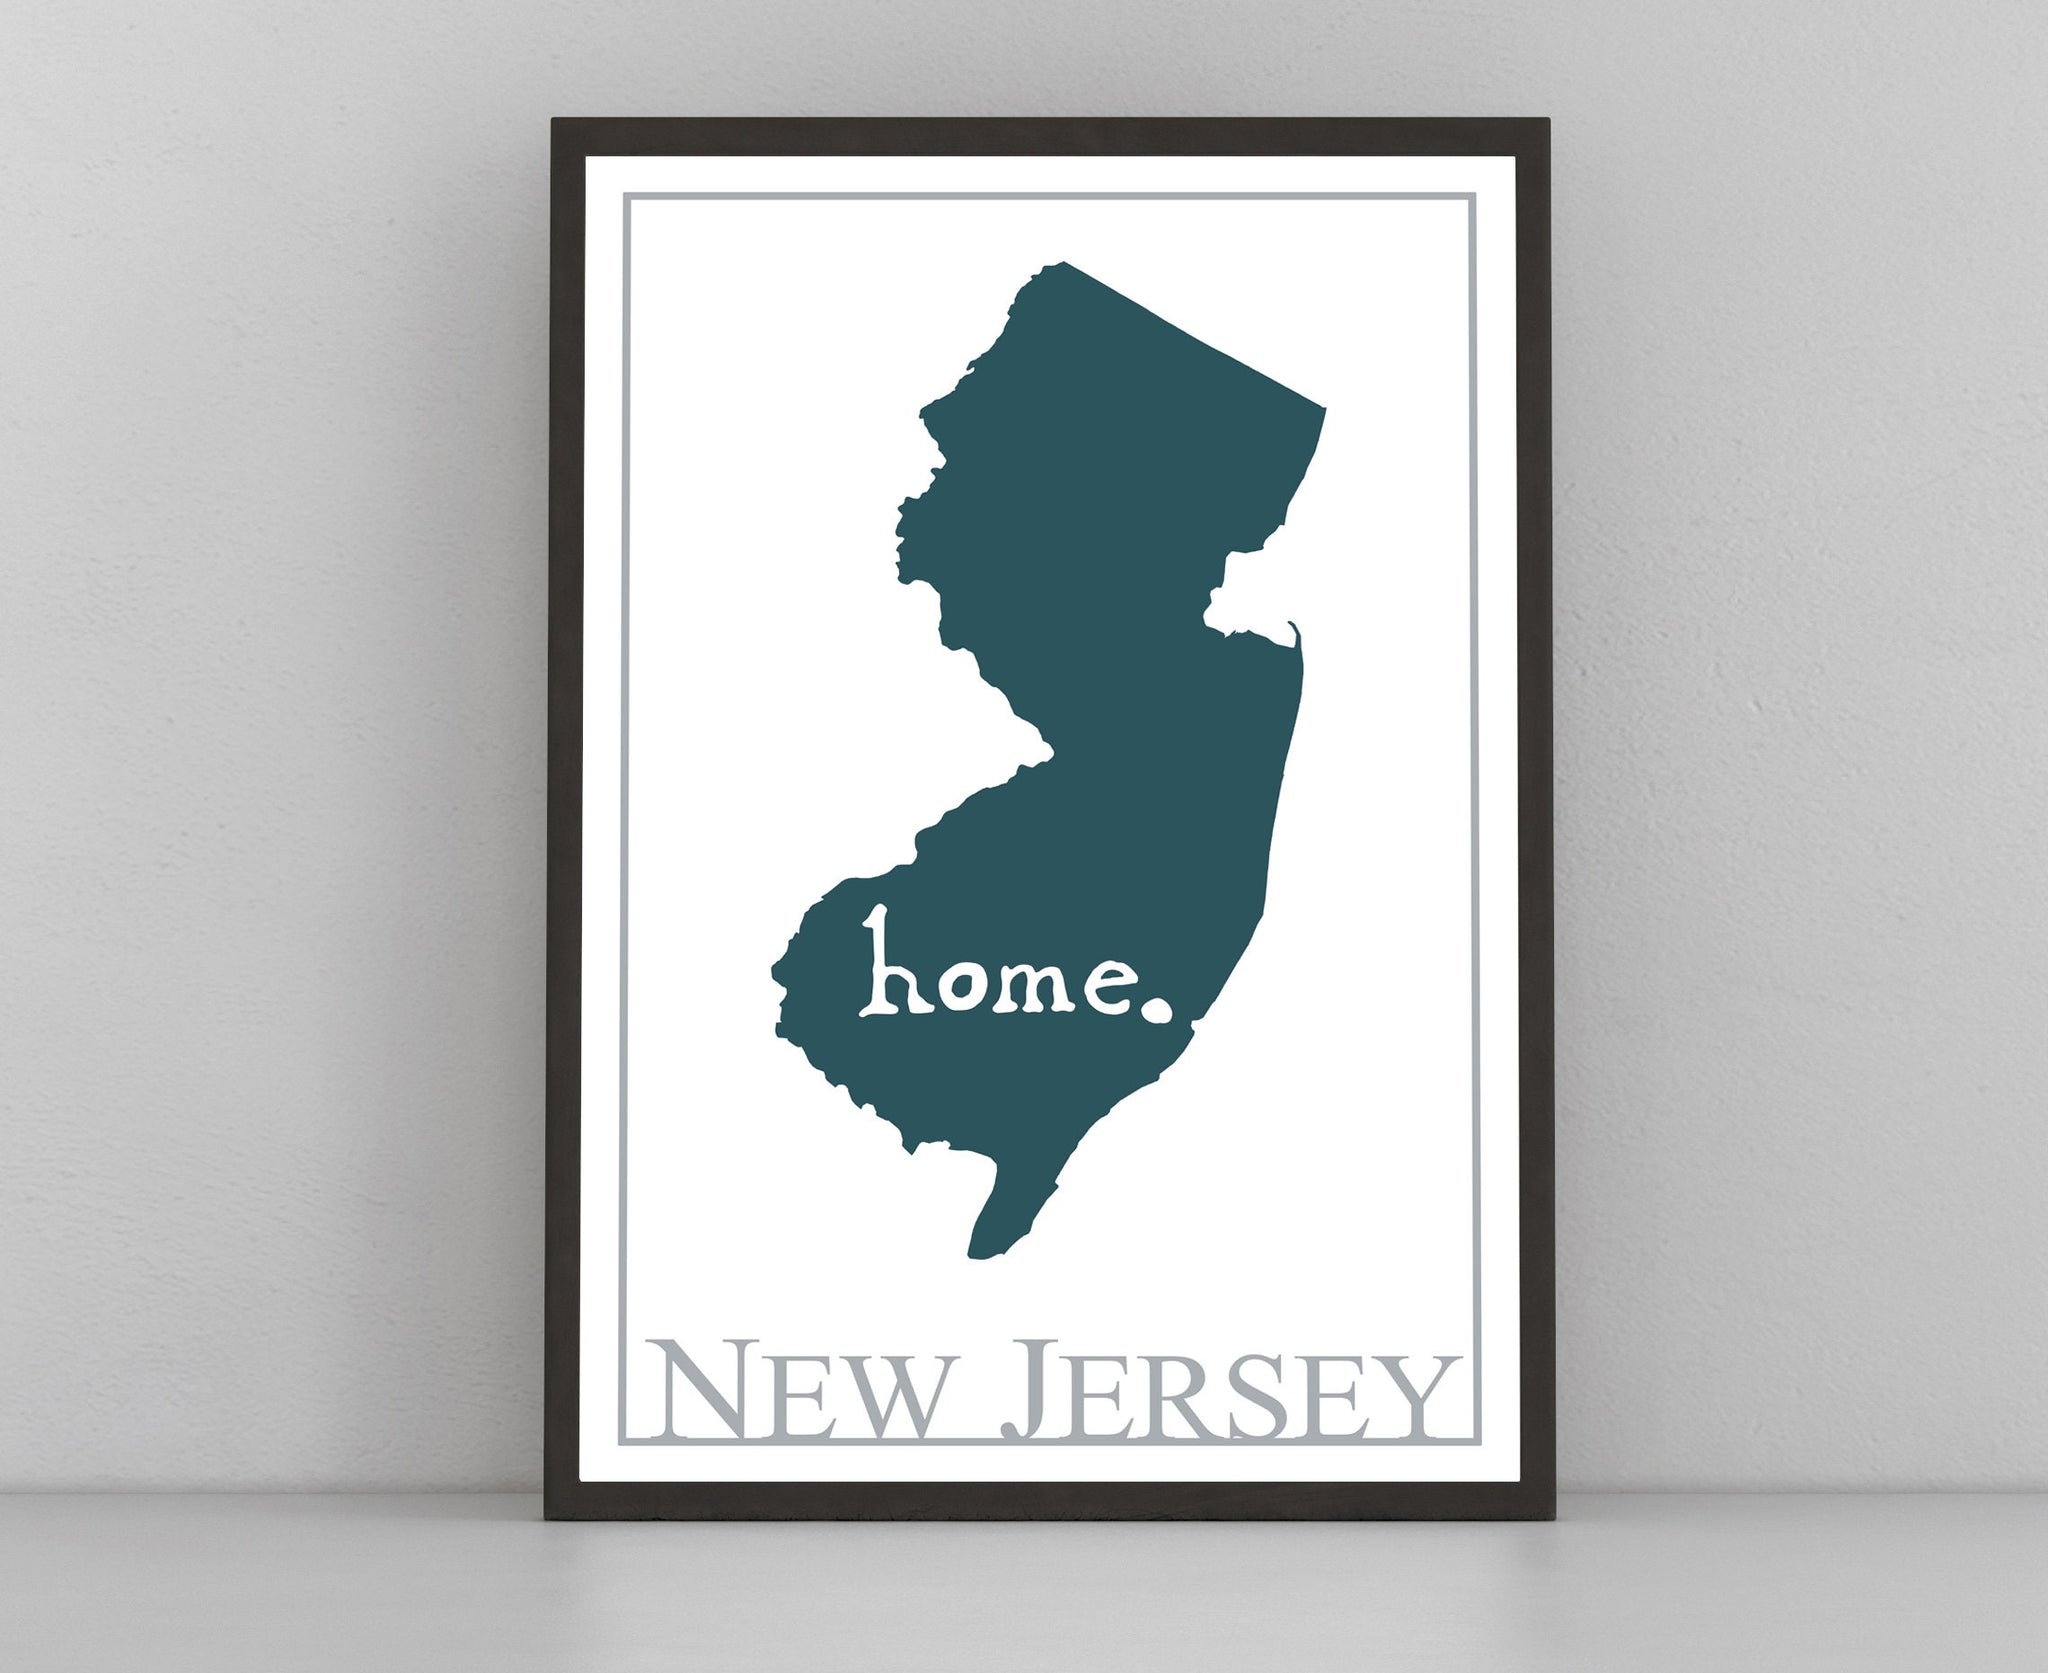 New Jersey Map Wall Art, New Jersey Modern Map Print, City map wall decor, New Jersey City Poster Print, State Posters, Home wall decoration